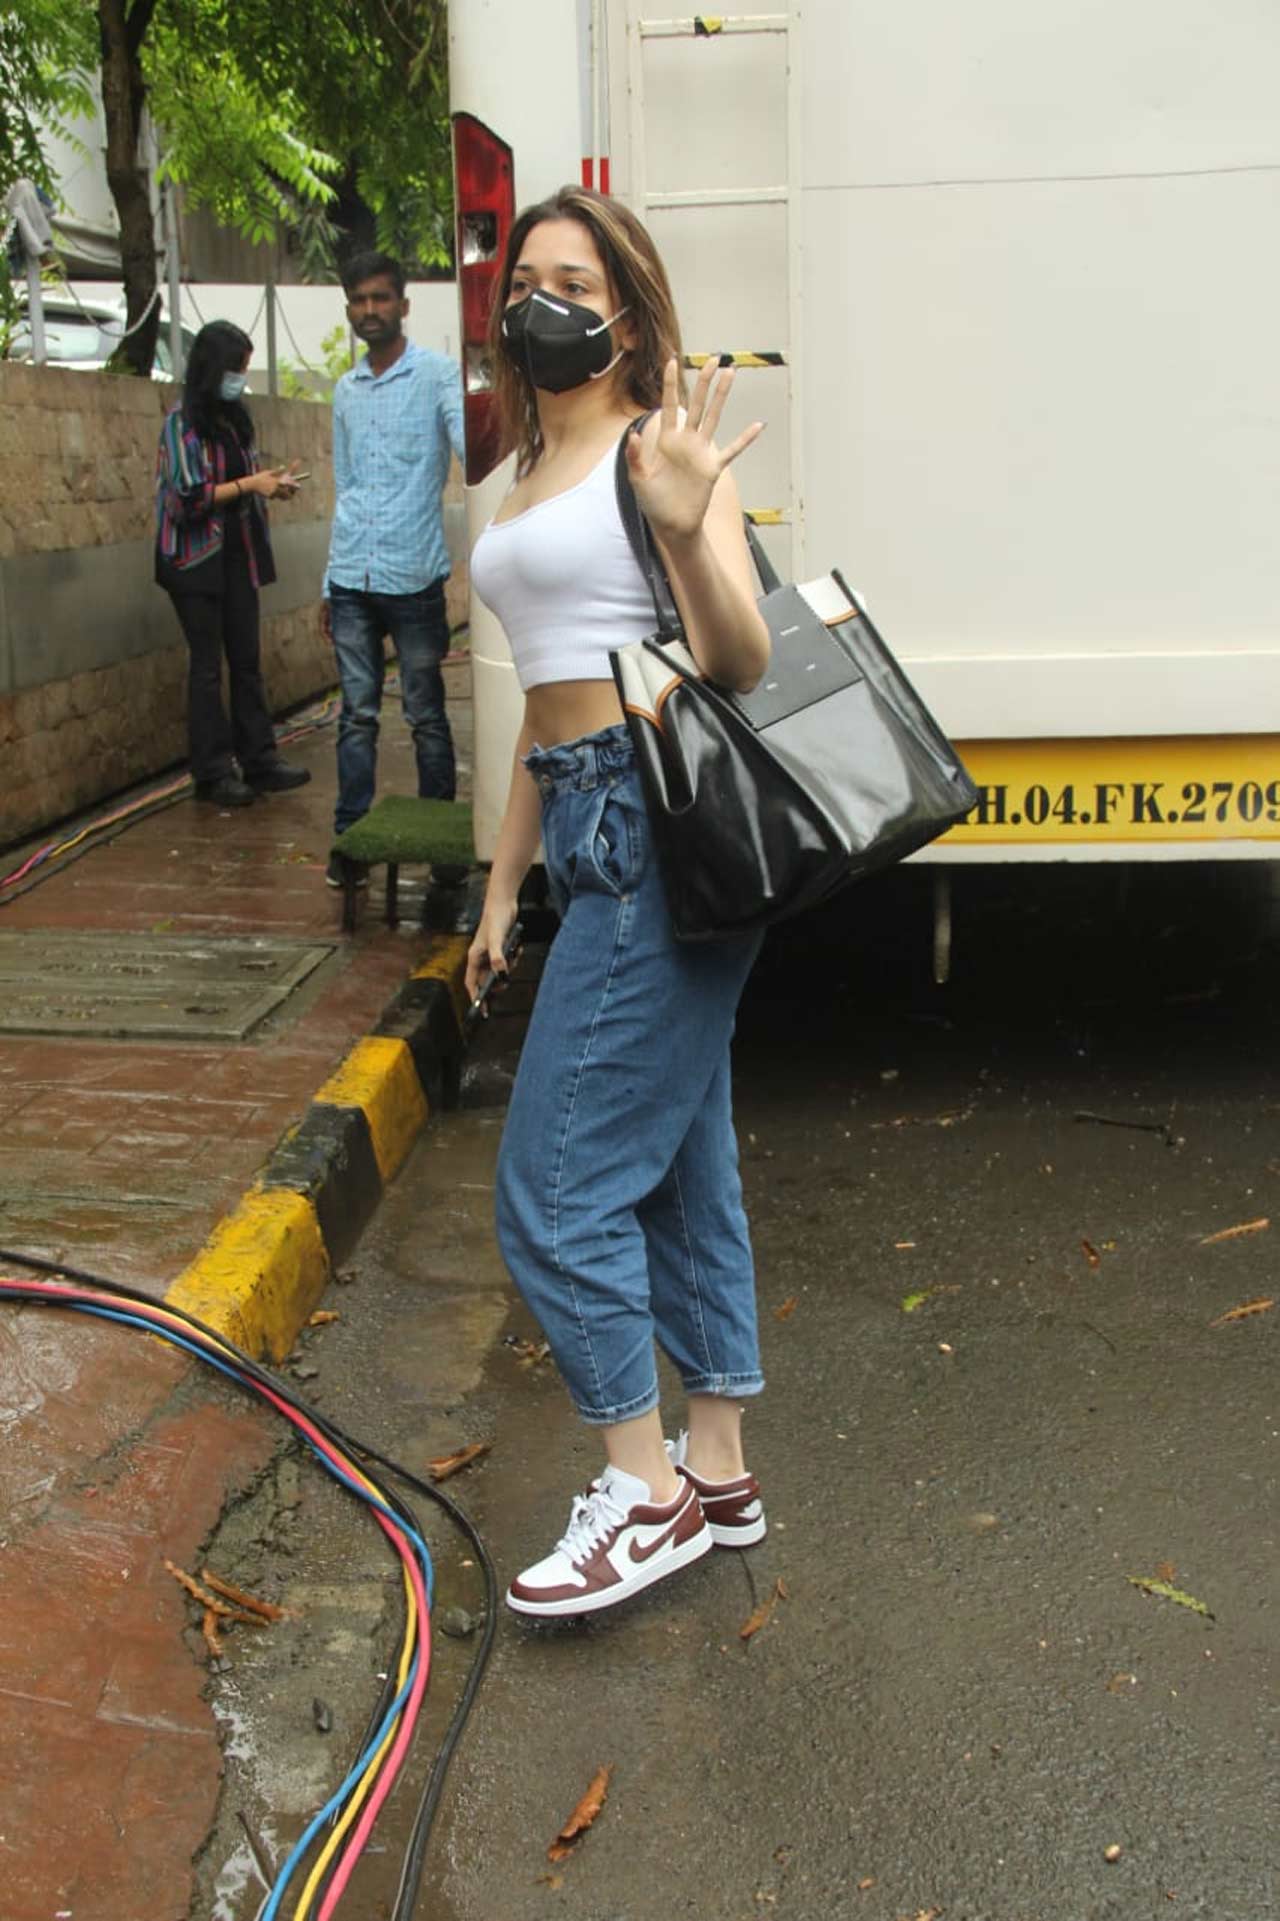 Actress Tamannaah Bhatia was seen in minimal make-up as she stepped out in the city. amannaah is one of the most prominent names in the South film industry and has even featured in Bollywood with films such as 'Himmatwala', 'Entertainment', 'Humshakals' and 'Tutak Tutak Tutiya'. Asked between south or Bollywood films which one is the most difficult to headline, Tamannaah told IANS: 